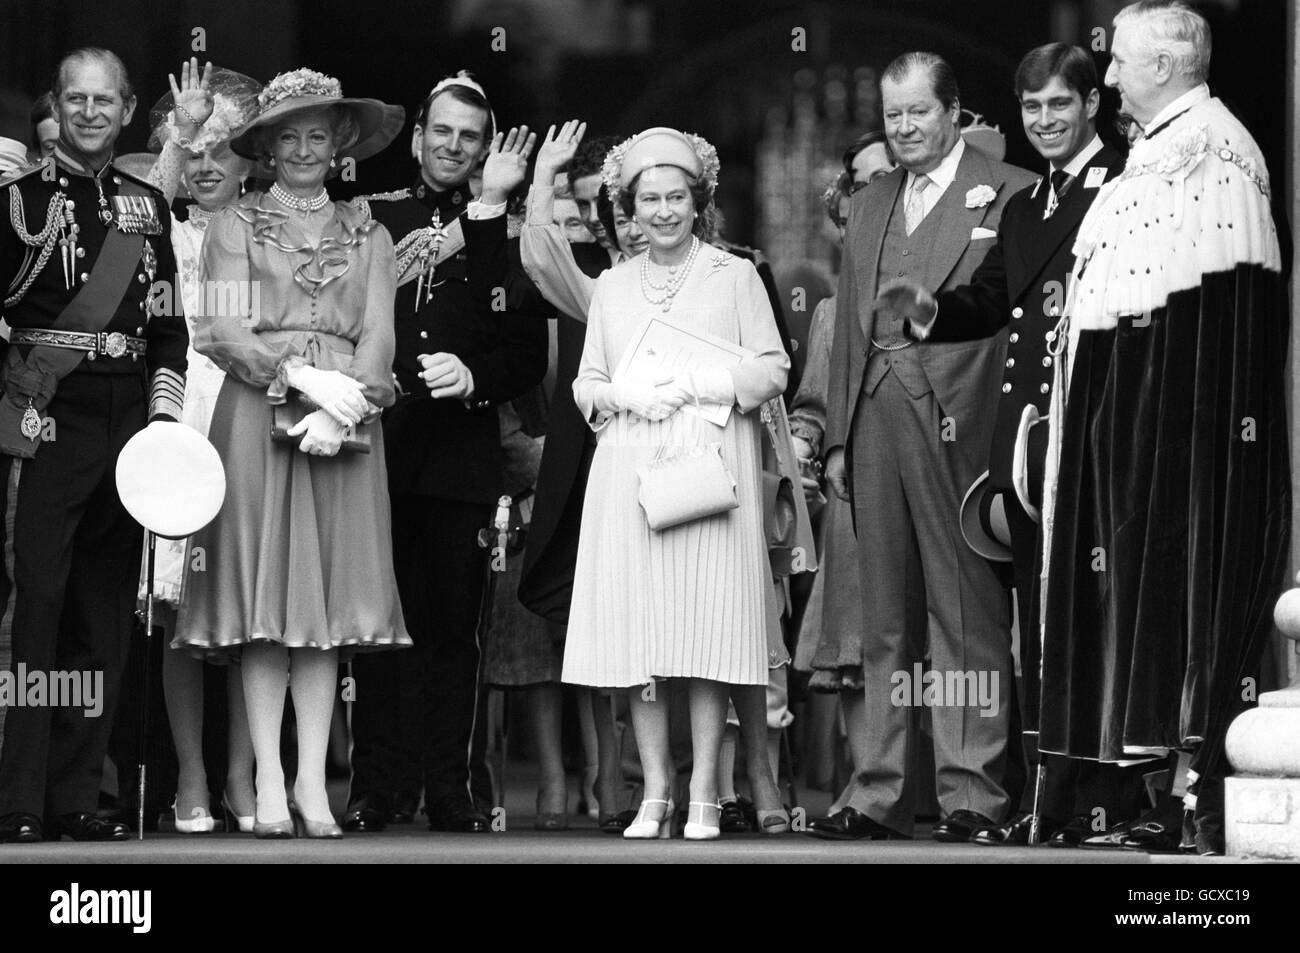 Waving the royal couple goodbye from the steps of St Paul's Cathedral, left to right the Duke of Edinburgh, Princess Anne (obscured), Frances Shand Kydd, Captain Mark Phillips, the Queen, Earl Spencer, Prince Andrew, and the Lord Mayor of London, Colonel Sir Ronald Gardner-Thorpe. Stock Photo